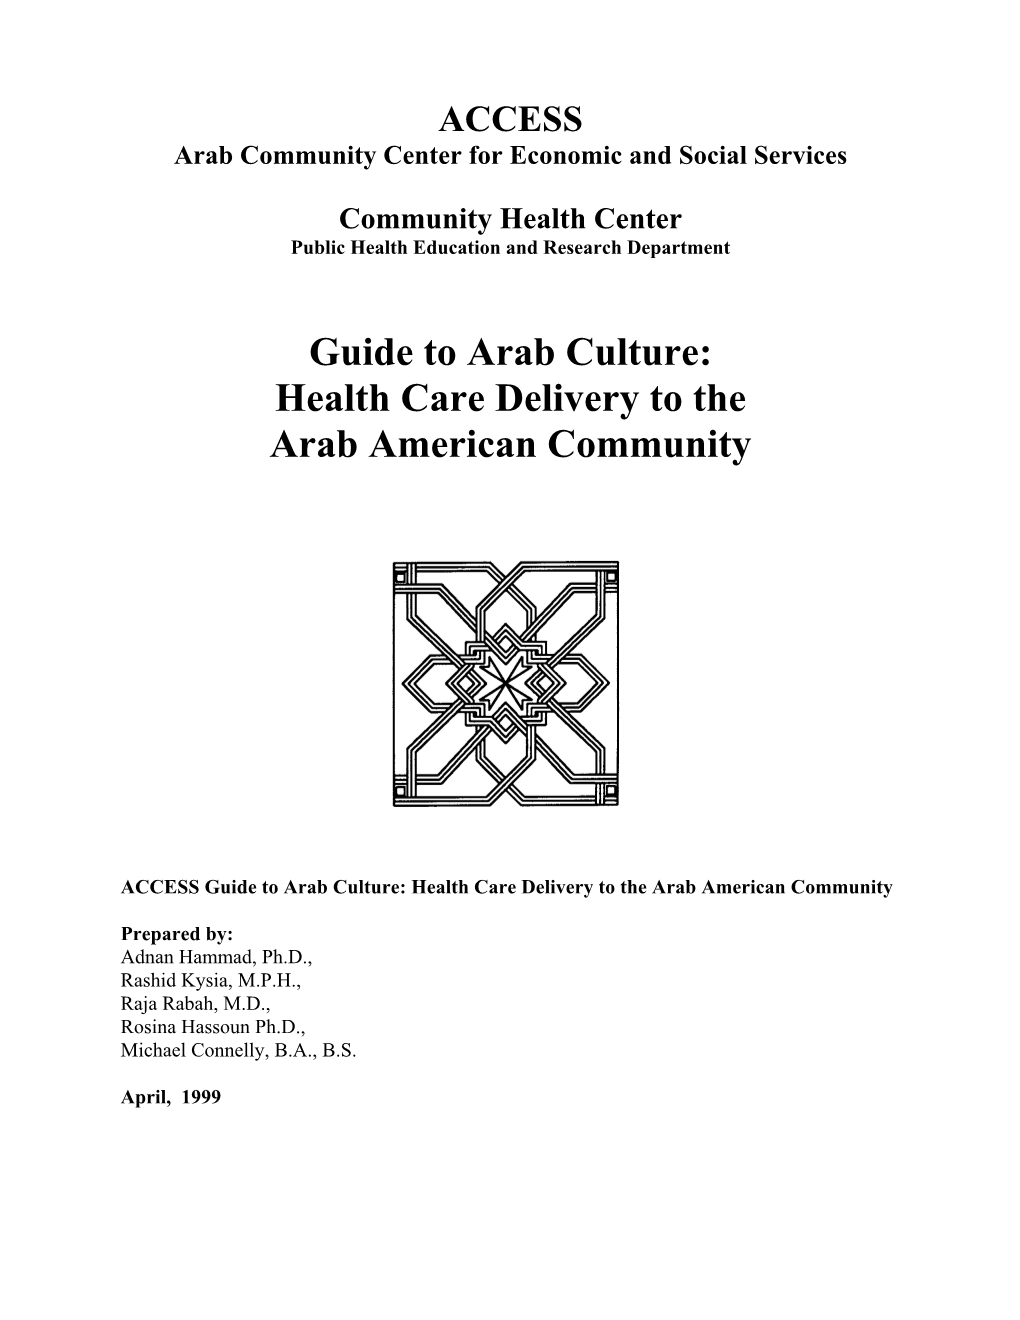 ACCESS Guide to Arab Culture Health Care Delivery to the Arab American Community